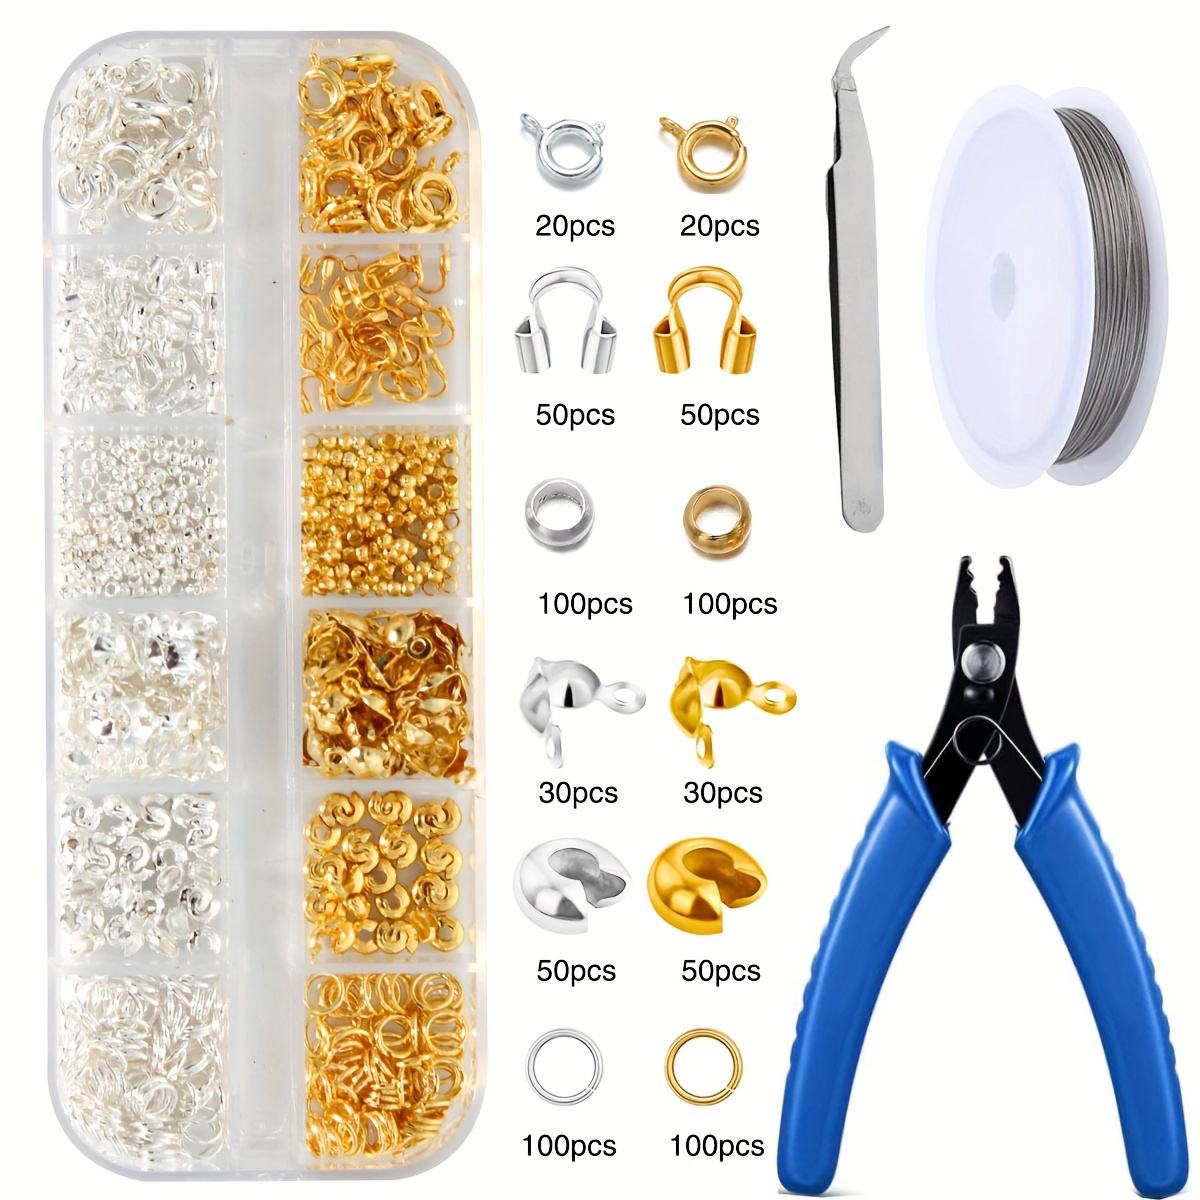 

1set Diy Jewelry Making Accessories Kit/ 20pcs Snap Hooks, Positioning Bead Spring Buckle U-shaped Buckle Crimp Beads Lobster Buckle Steel Wire Multi Type For Choice